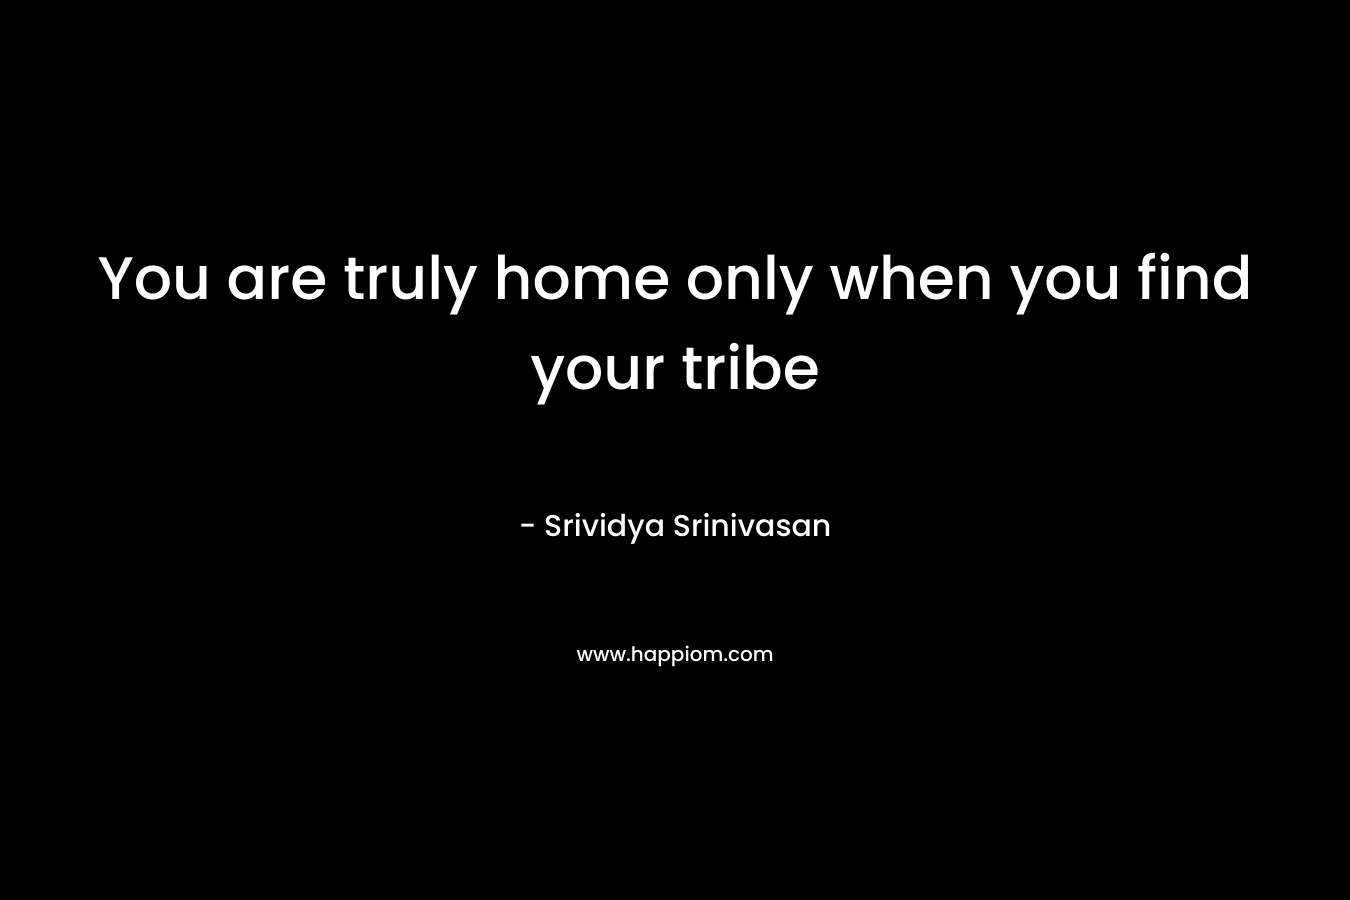 You are truly home only when you find your tribe – Srividya Srinivasan